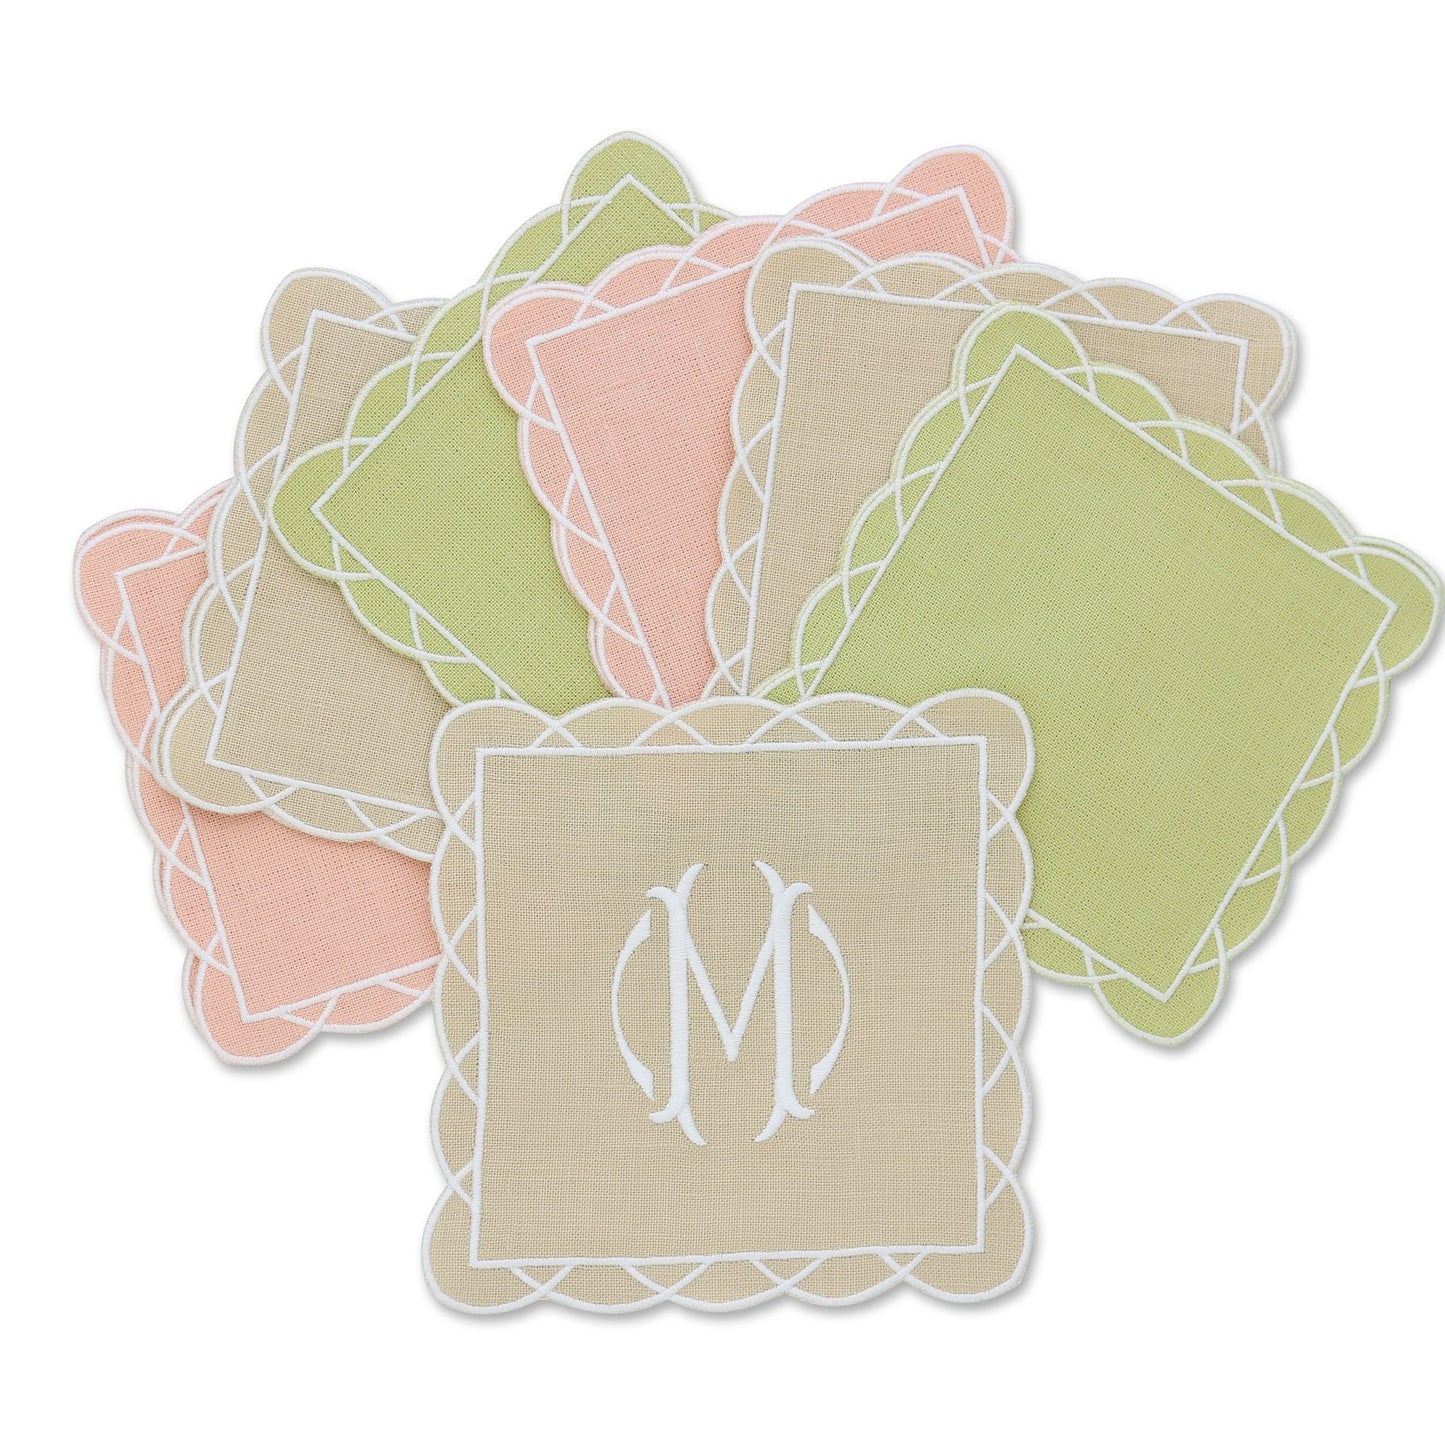 set of Daisy cocktail napkins in various colors and cream embroidered edges, monogram M